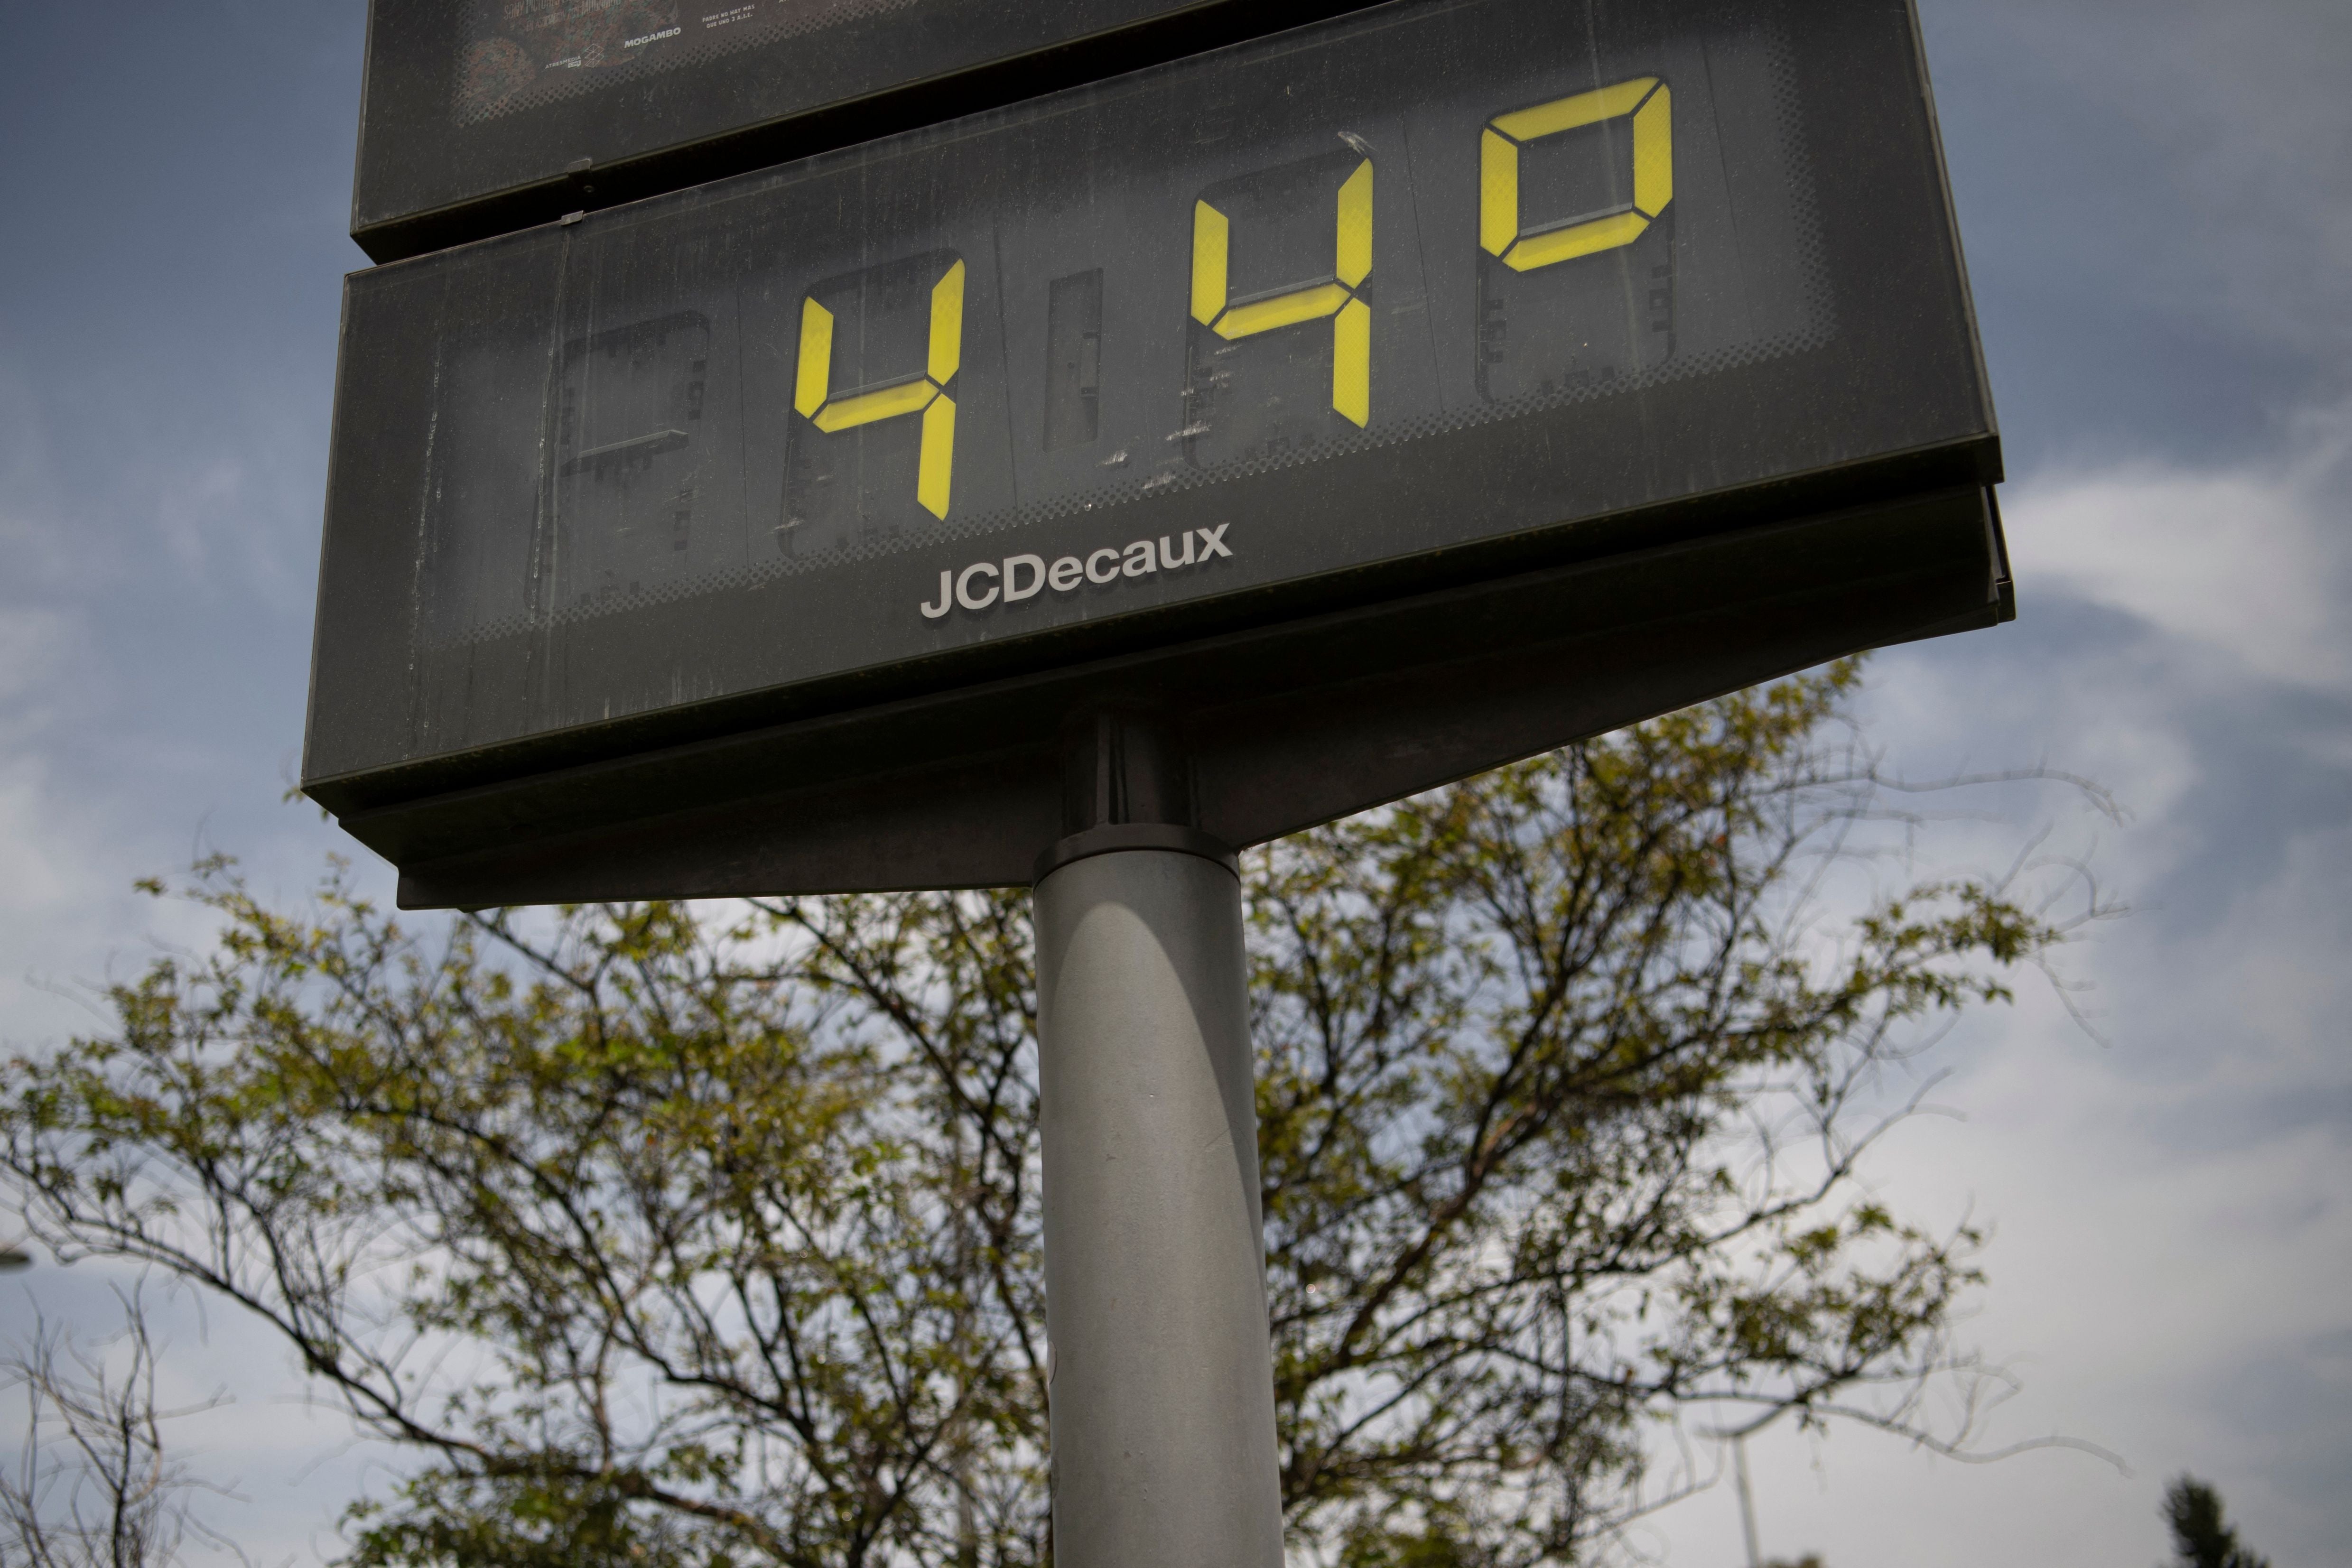 A street thermometer reads 44C during a heatwave in Seville